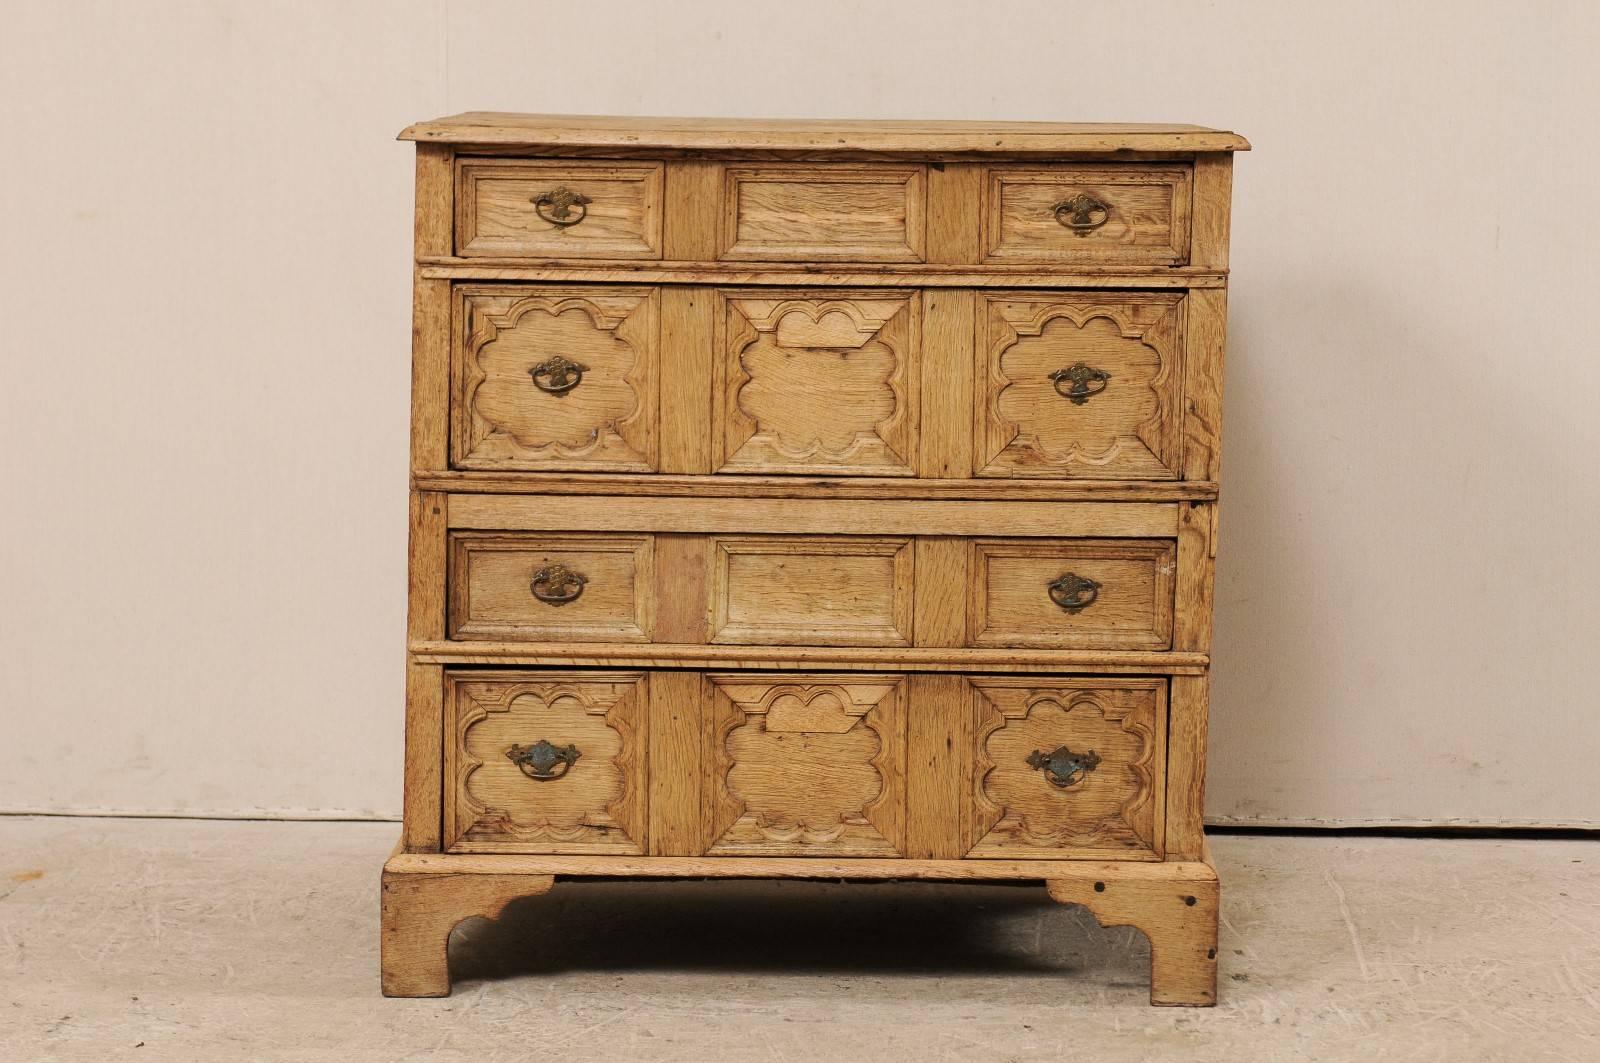 An English Jacobean chest from the 19th century. This antique Jacobean bleached wood chest features beautiful quatrefoil and rectangular carved drawer fronts. There are four dovetailed drawers, alternating between a slender top and middle drawer